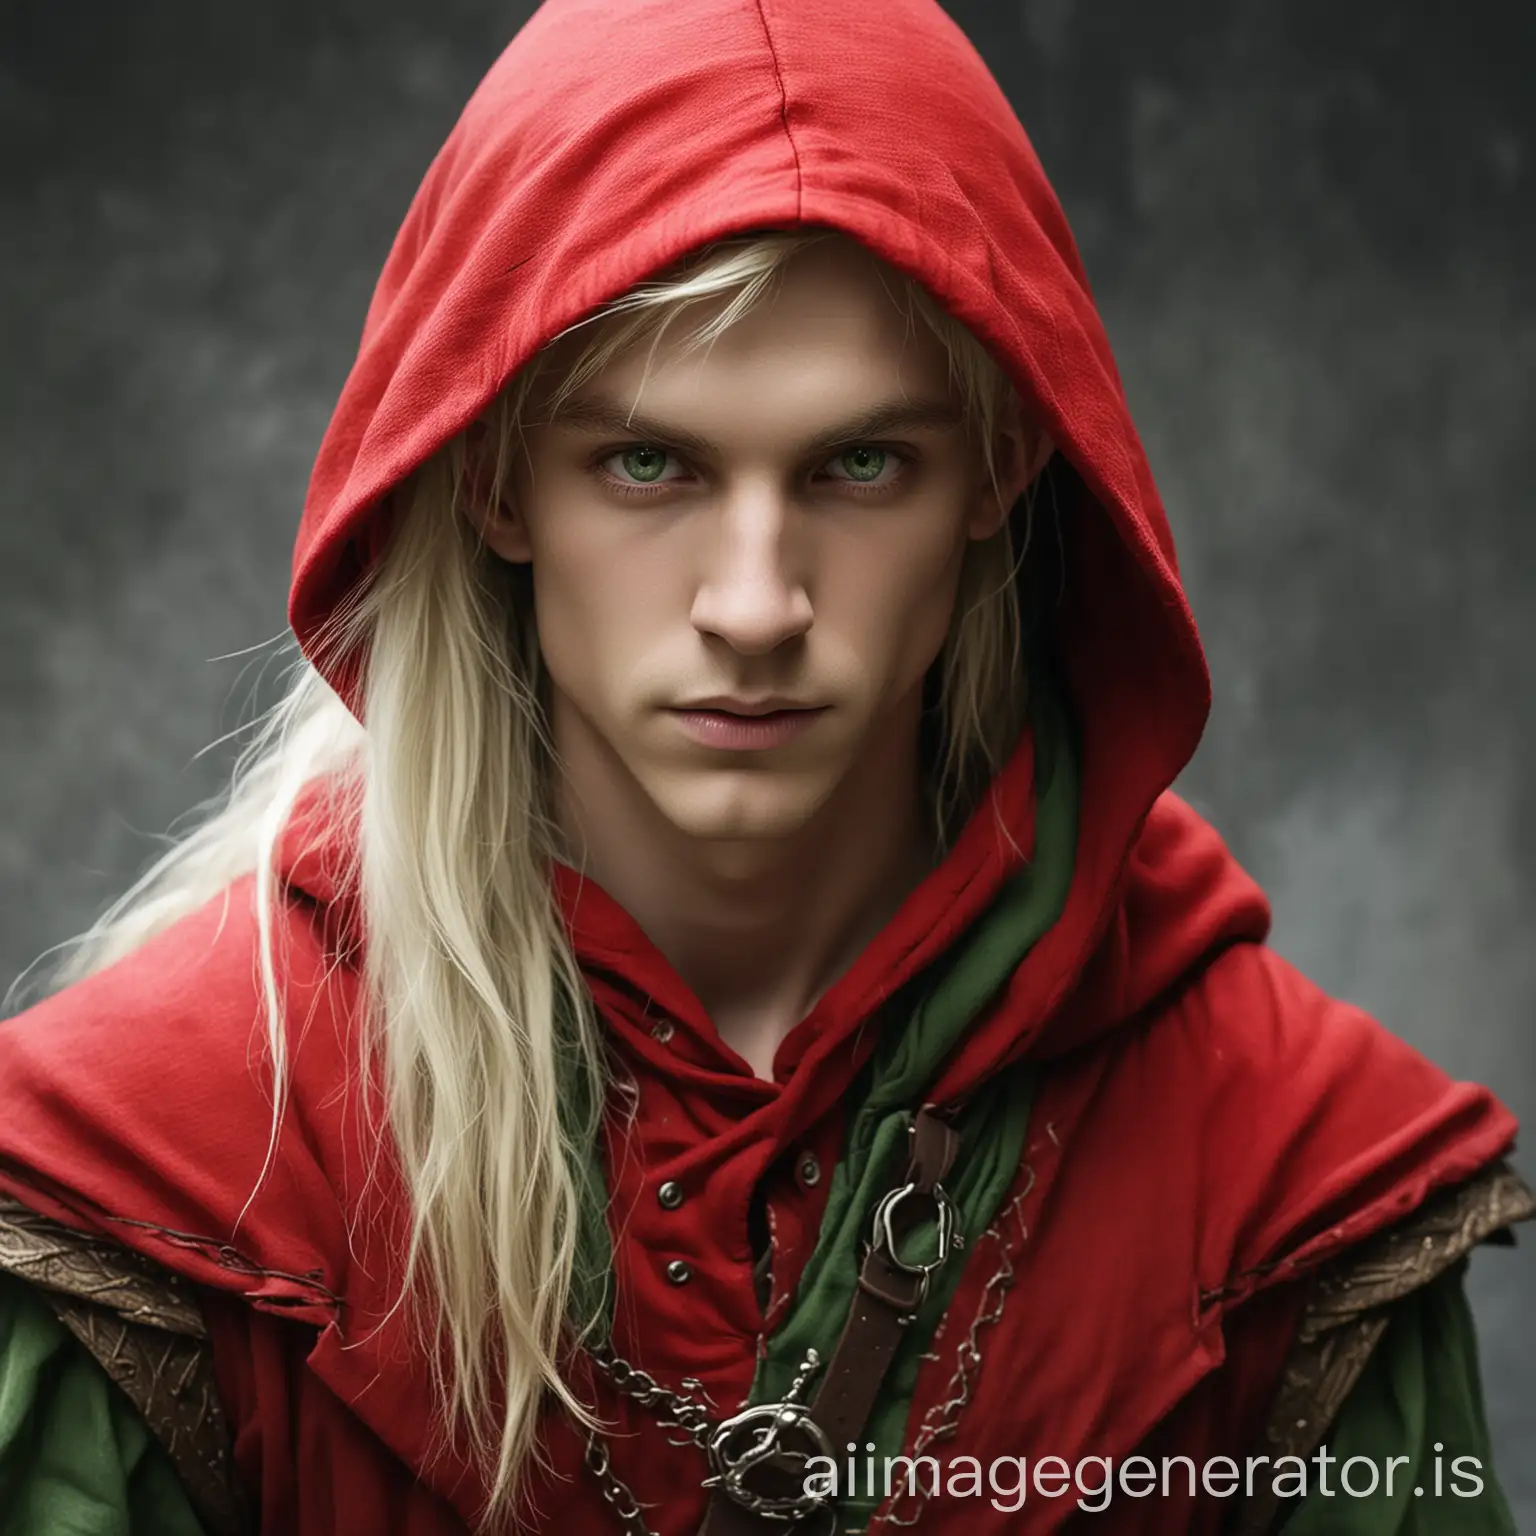 Mysterious-Blonde-Elf-with-Intense-Gaze-in-Red-Hood